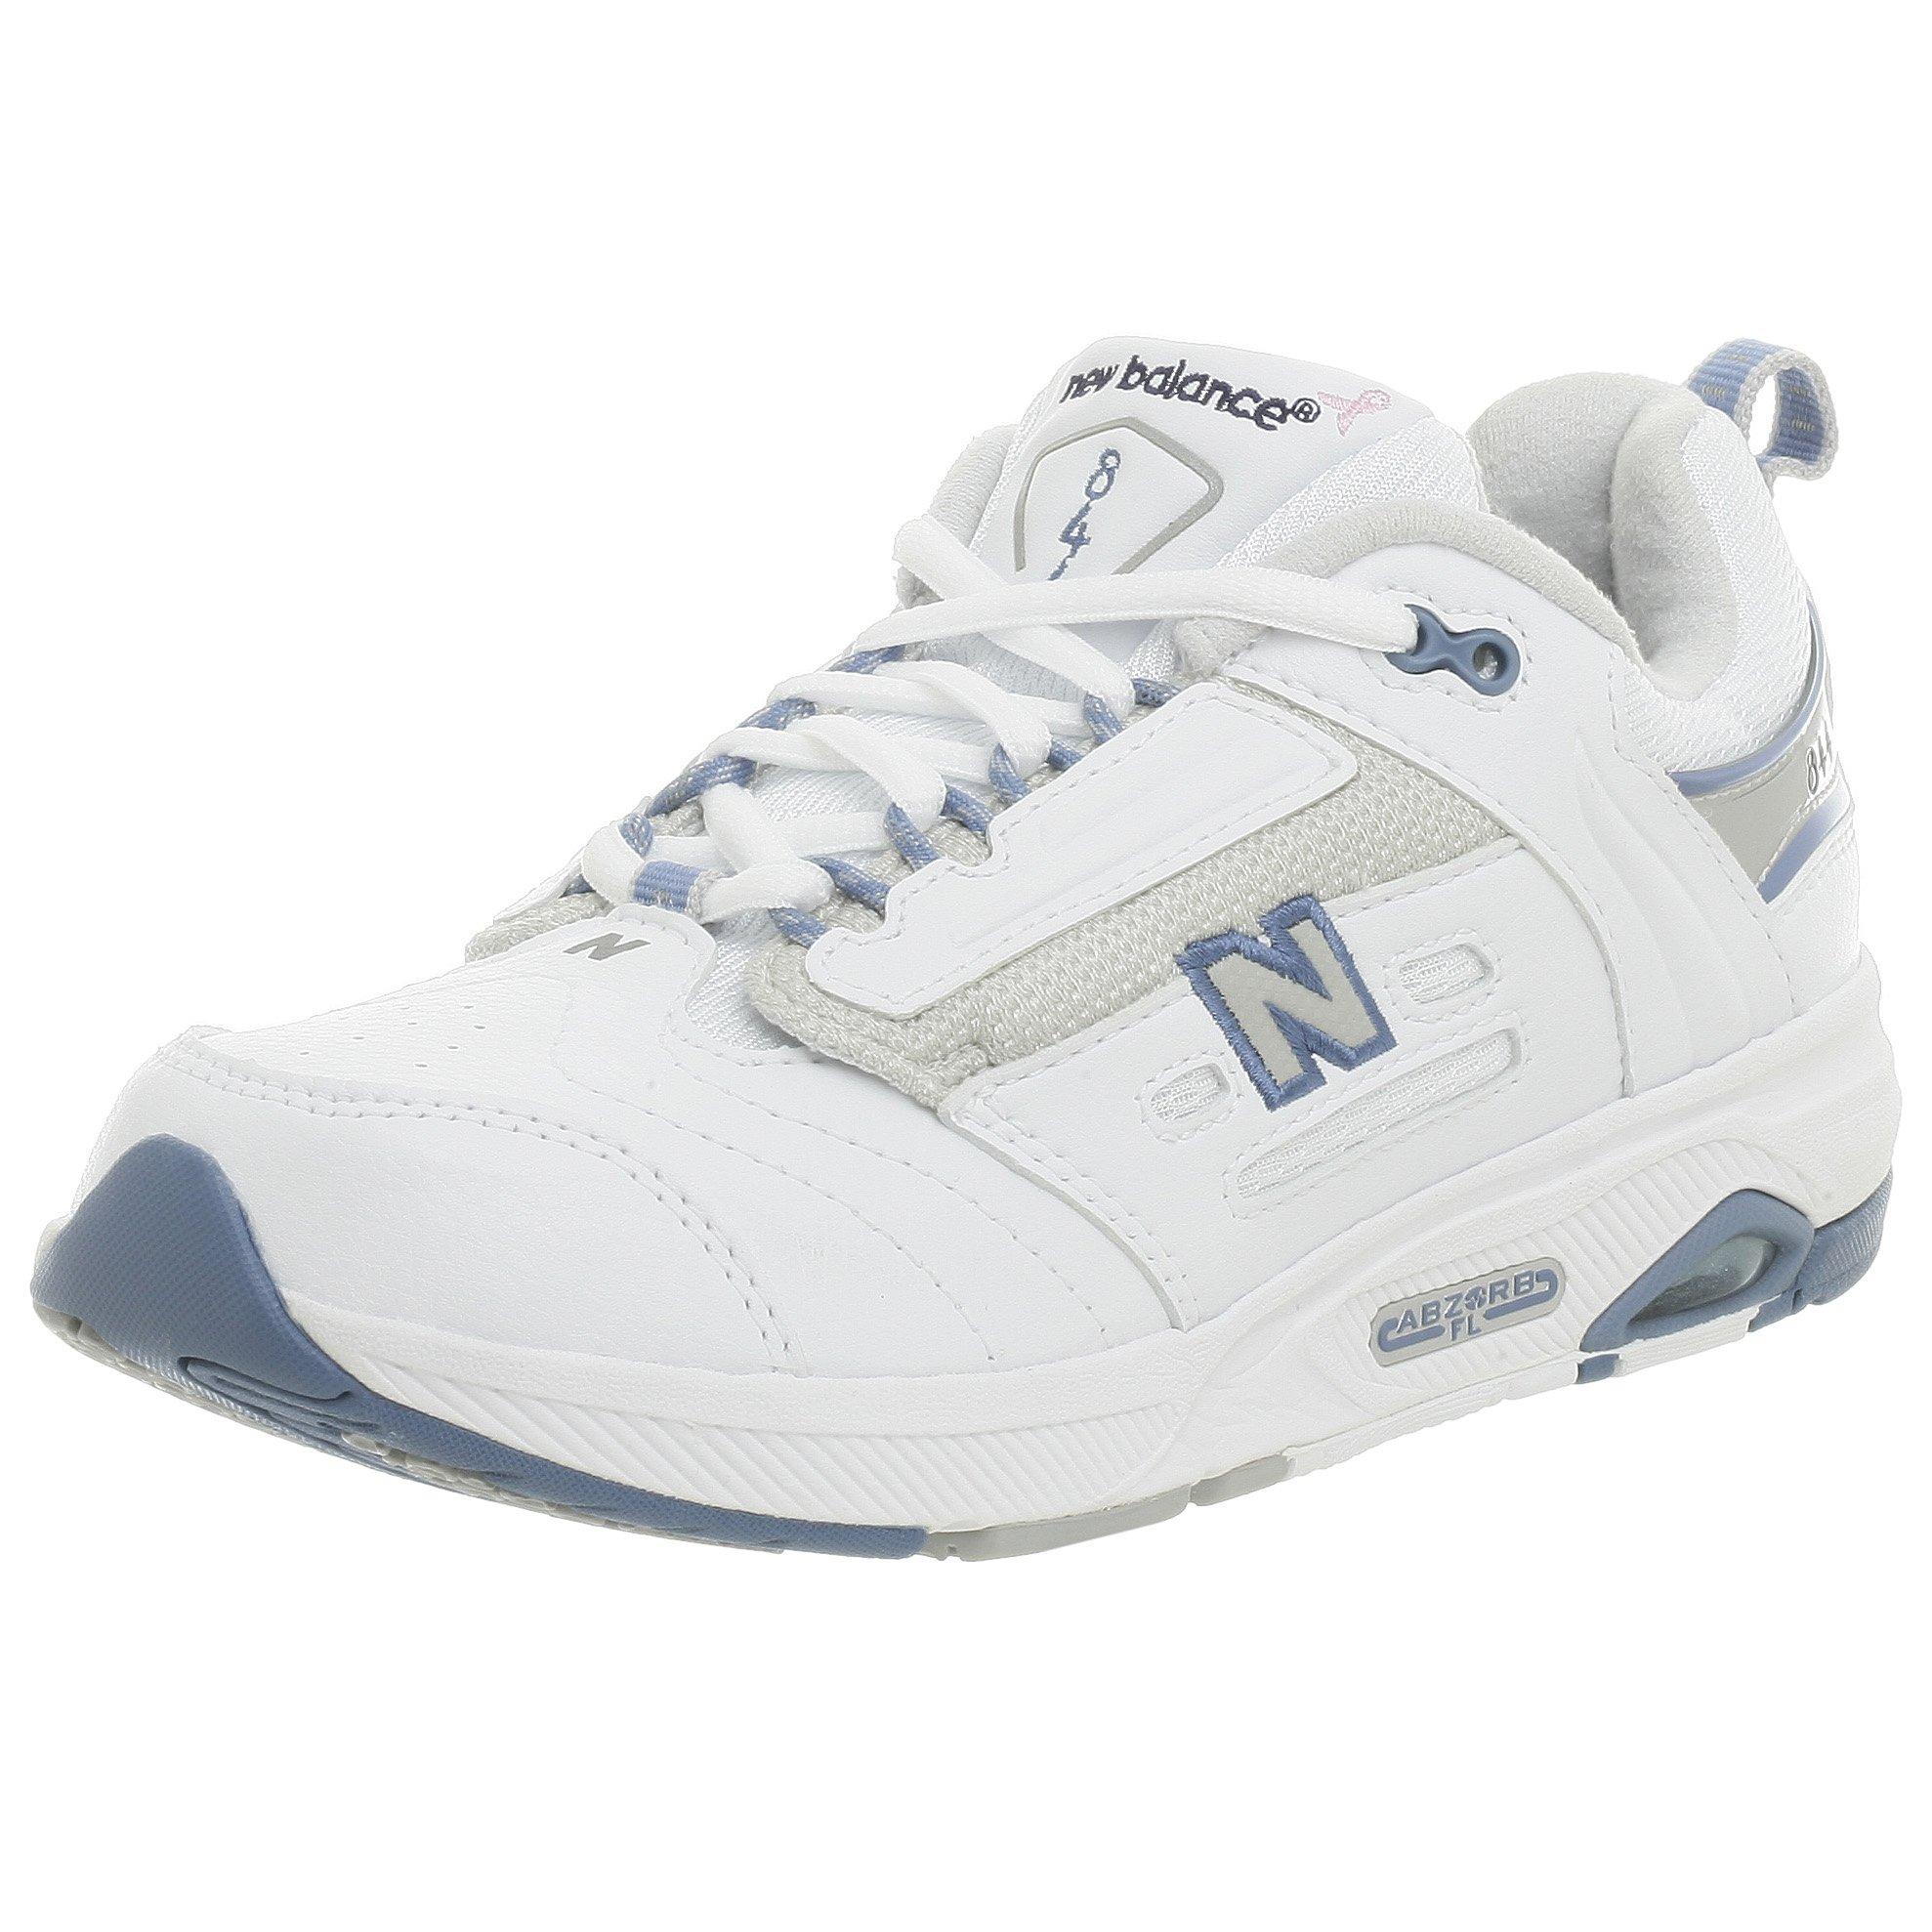 New Balance 844 V1 Motion Control Walking Shoe in White | Lyst